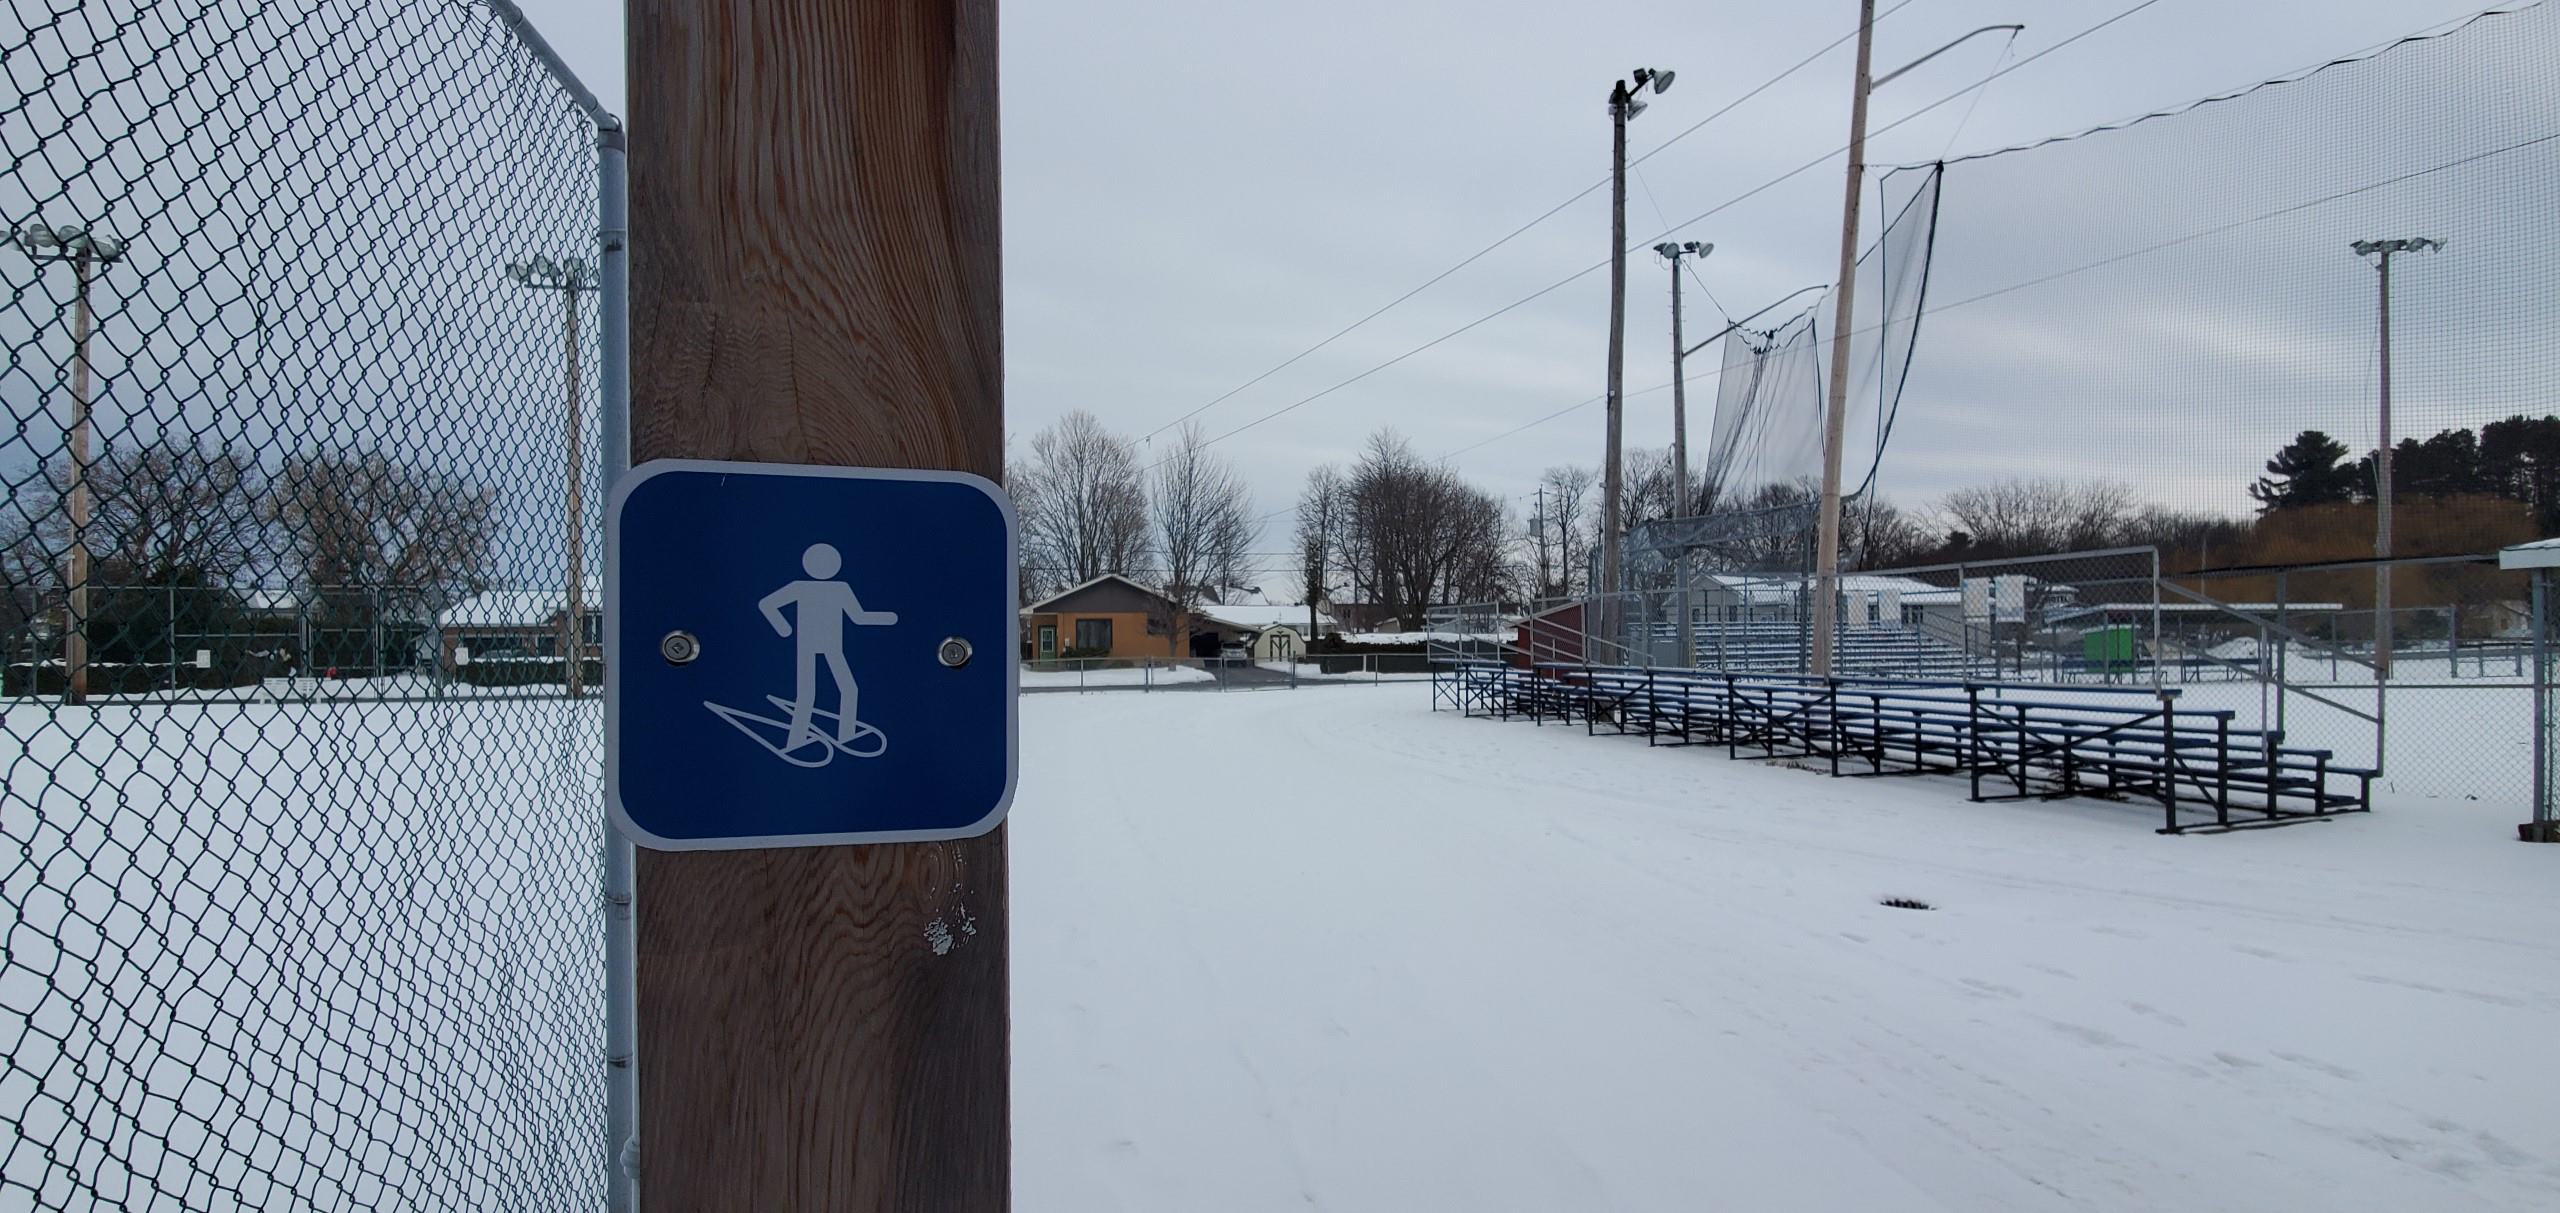 Snowshoeing sign on fence at a park